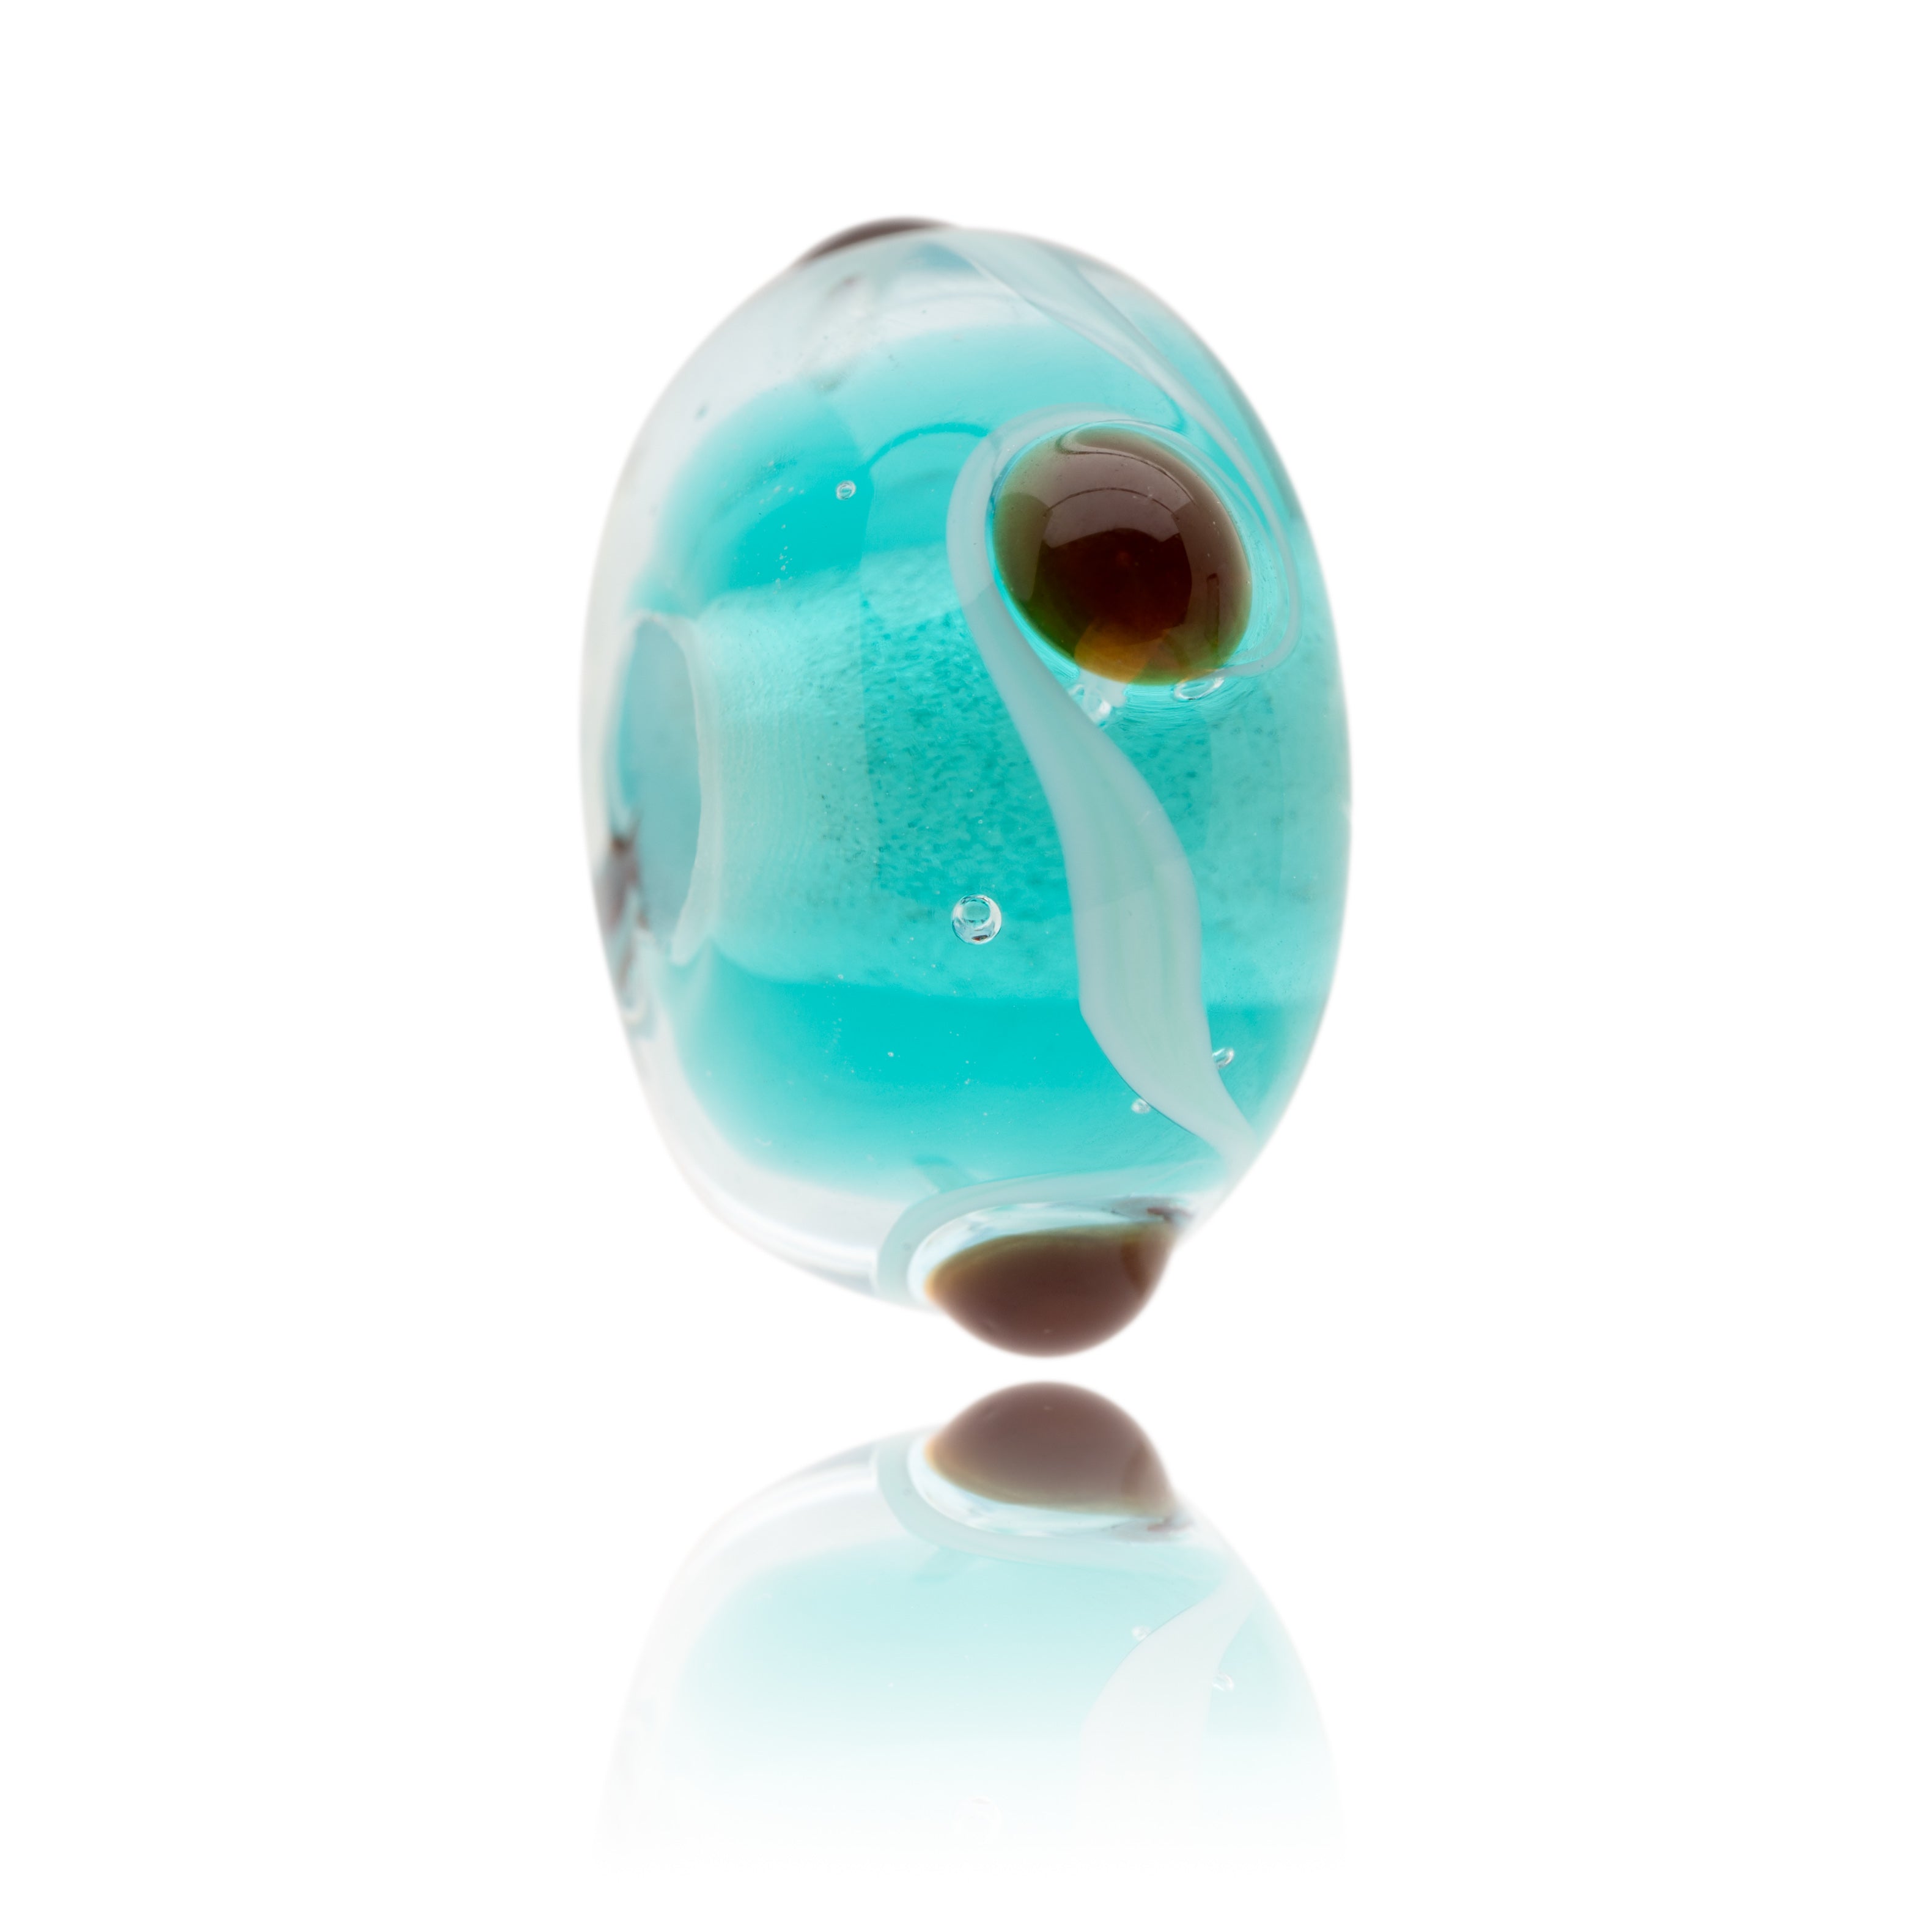 Turquoise and clear Murano glass bead with brown dots, representing Watermouth Cove in North Devon.